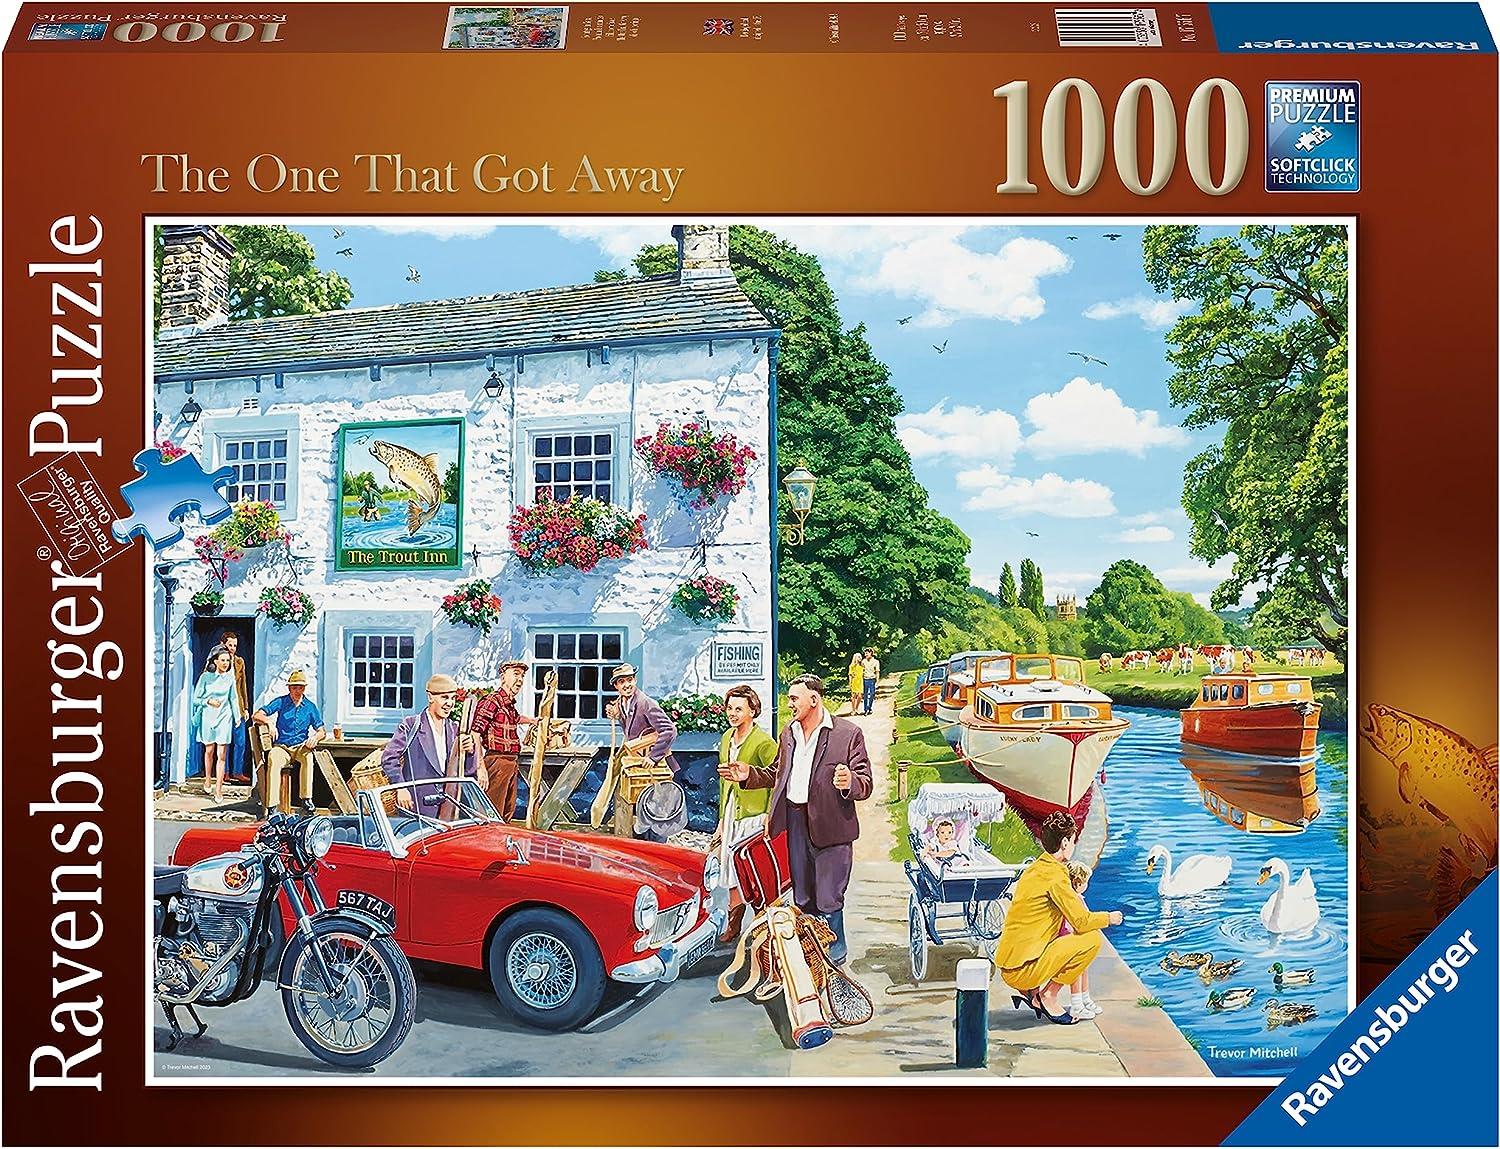 Ravensburger The One That Got Away Jigsaw Puzzle (1000 Pieces)